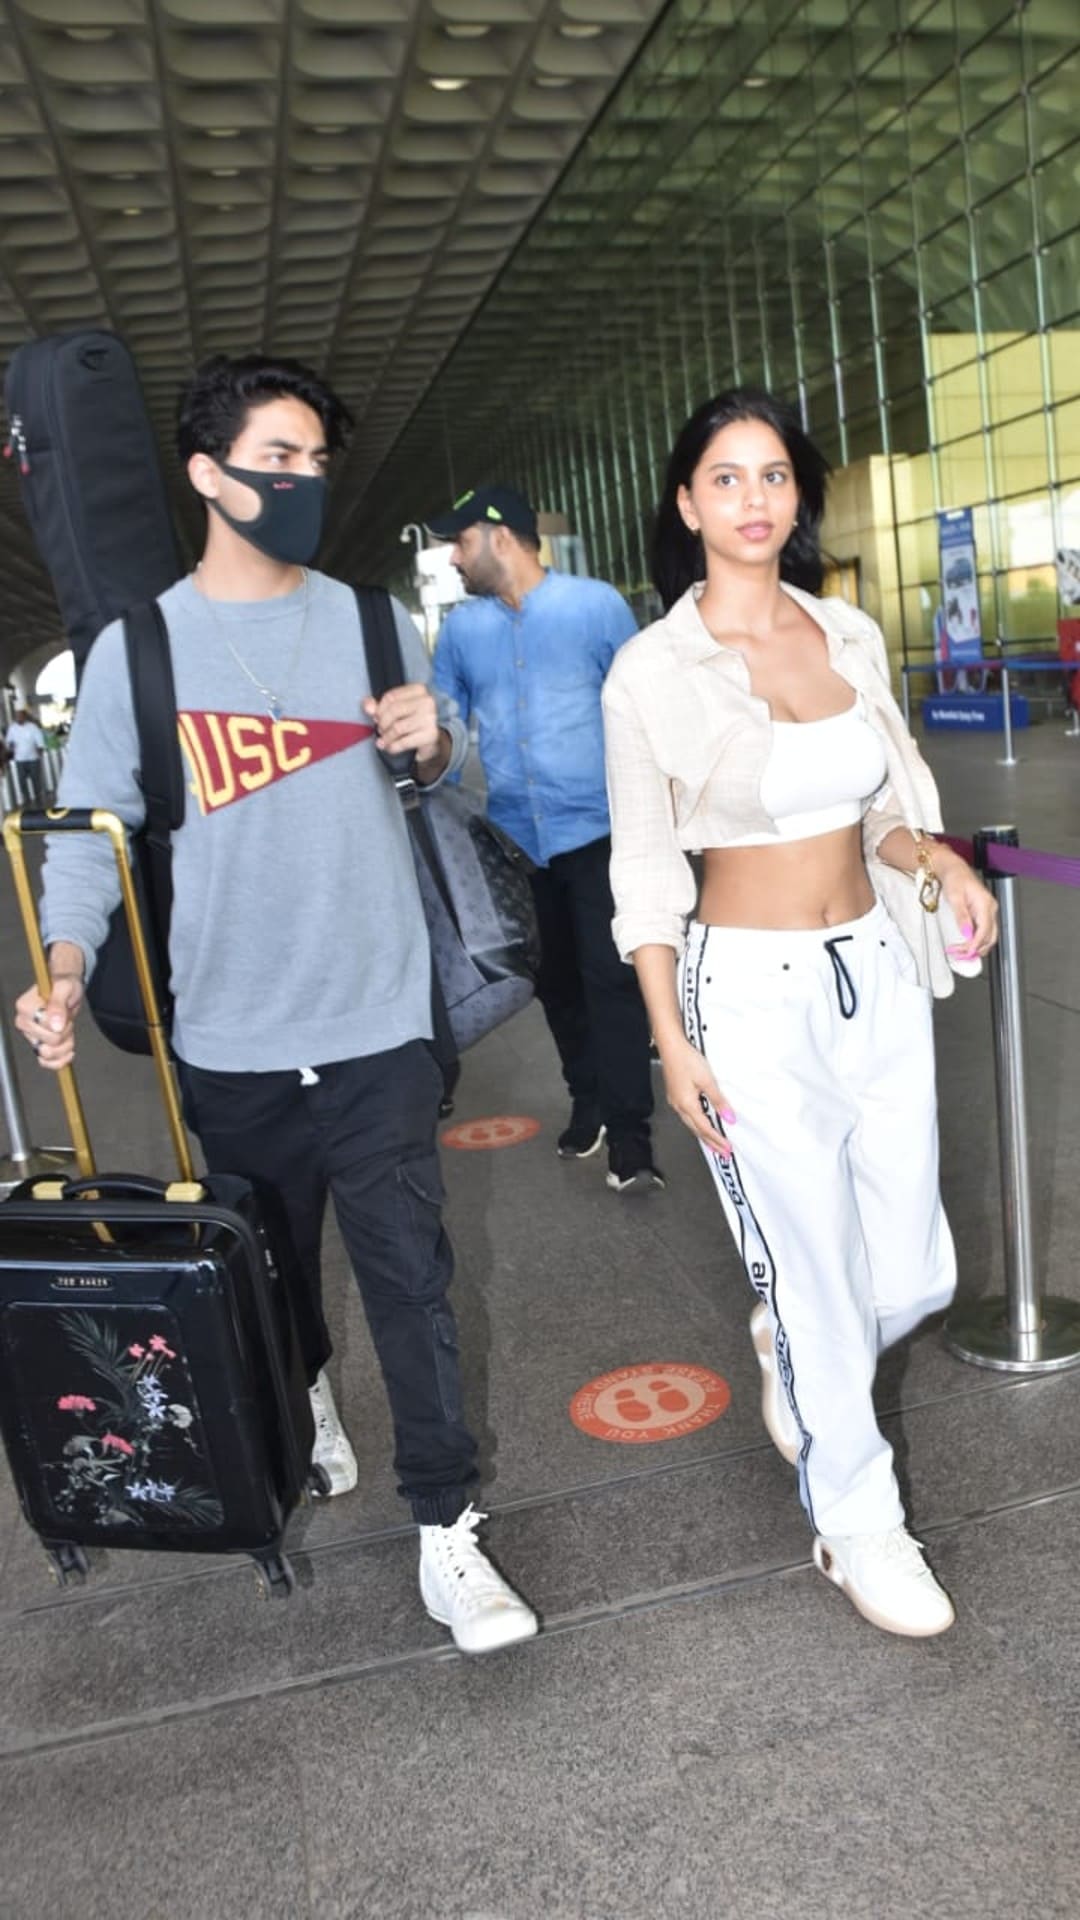 Suhana Khan wins fans with simple airport look: 'Beauty with class